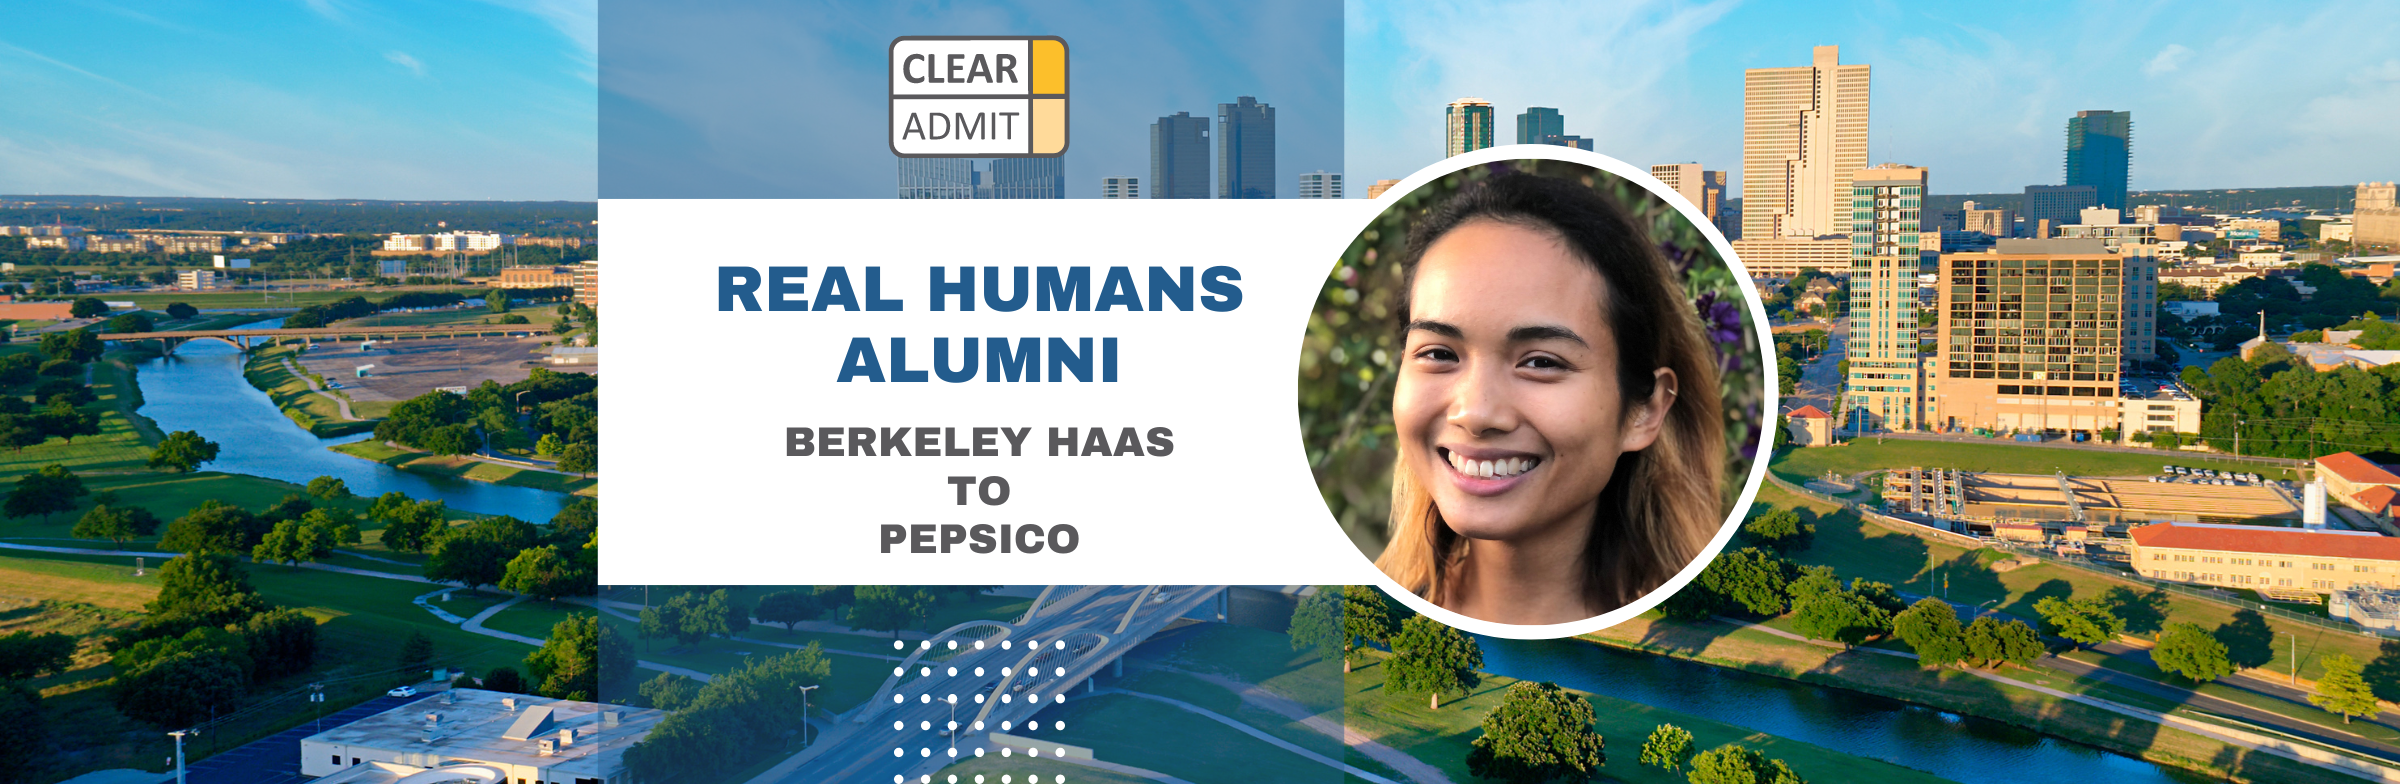 Image for Real Humans of PepsiCo: Maria Deloso, Berkeley Haas, MBA ’23, Associate Marketing Manager